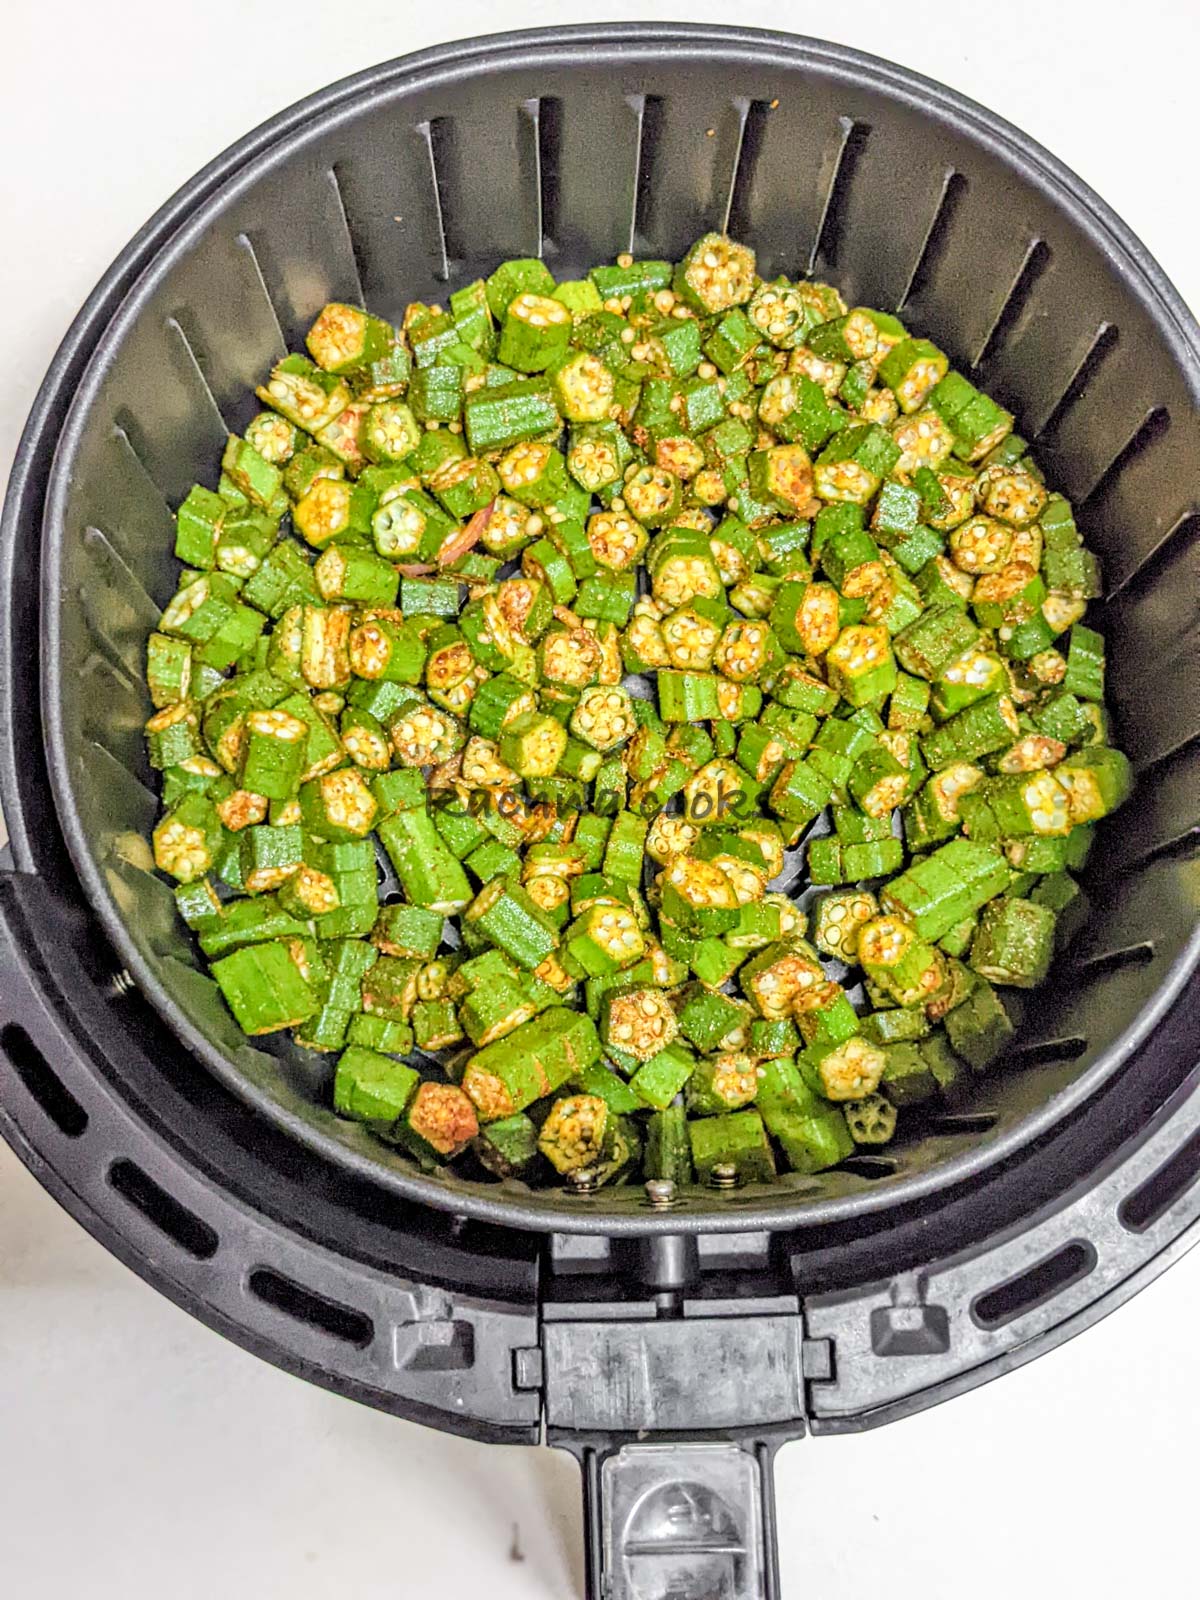 Spiced okra laid in air fryer basket ready for air frying.